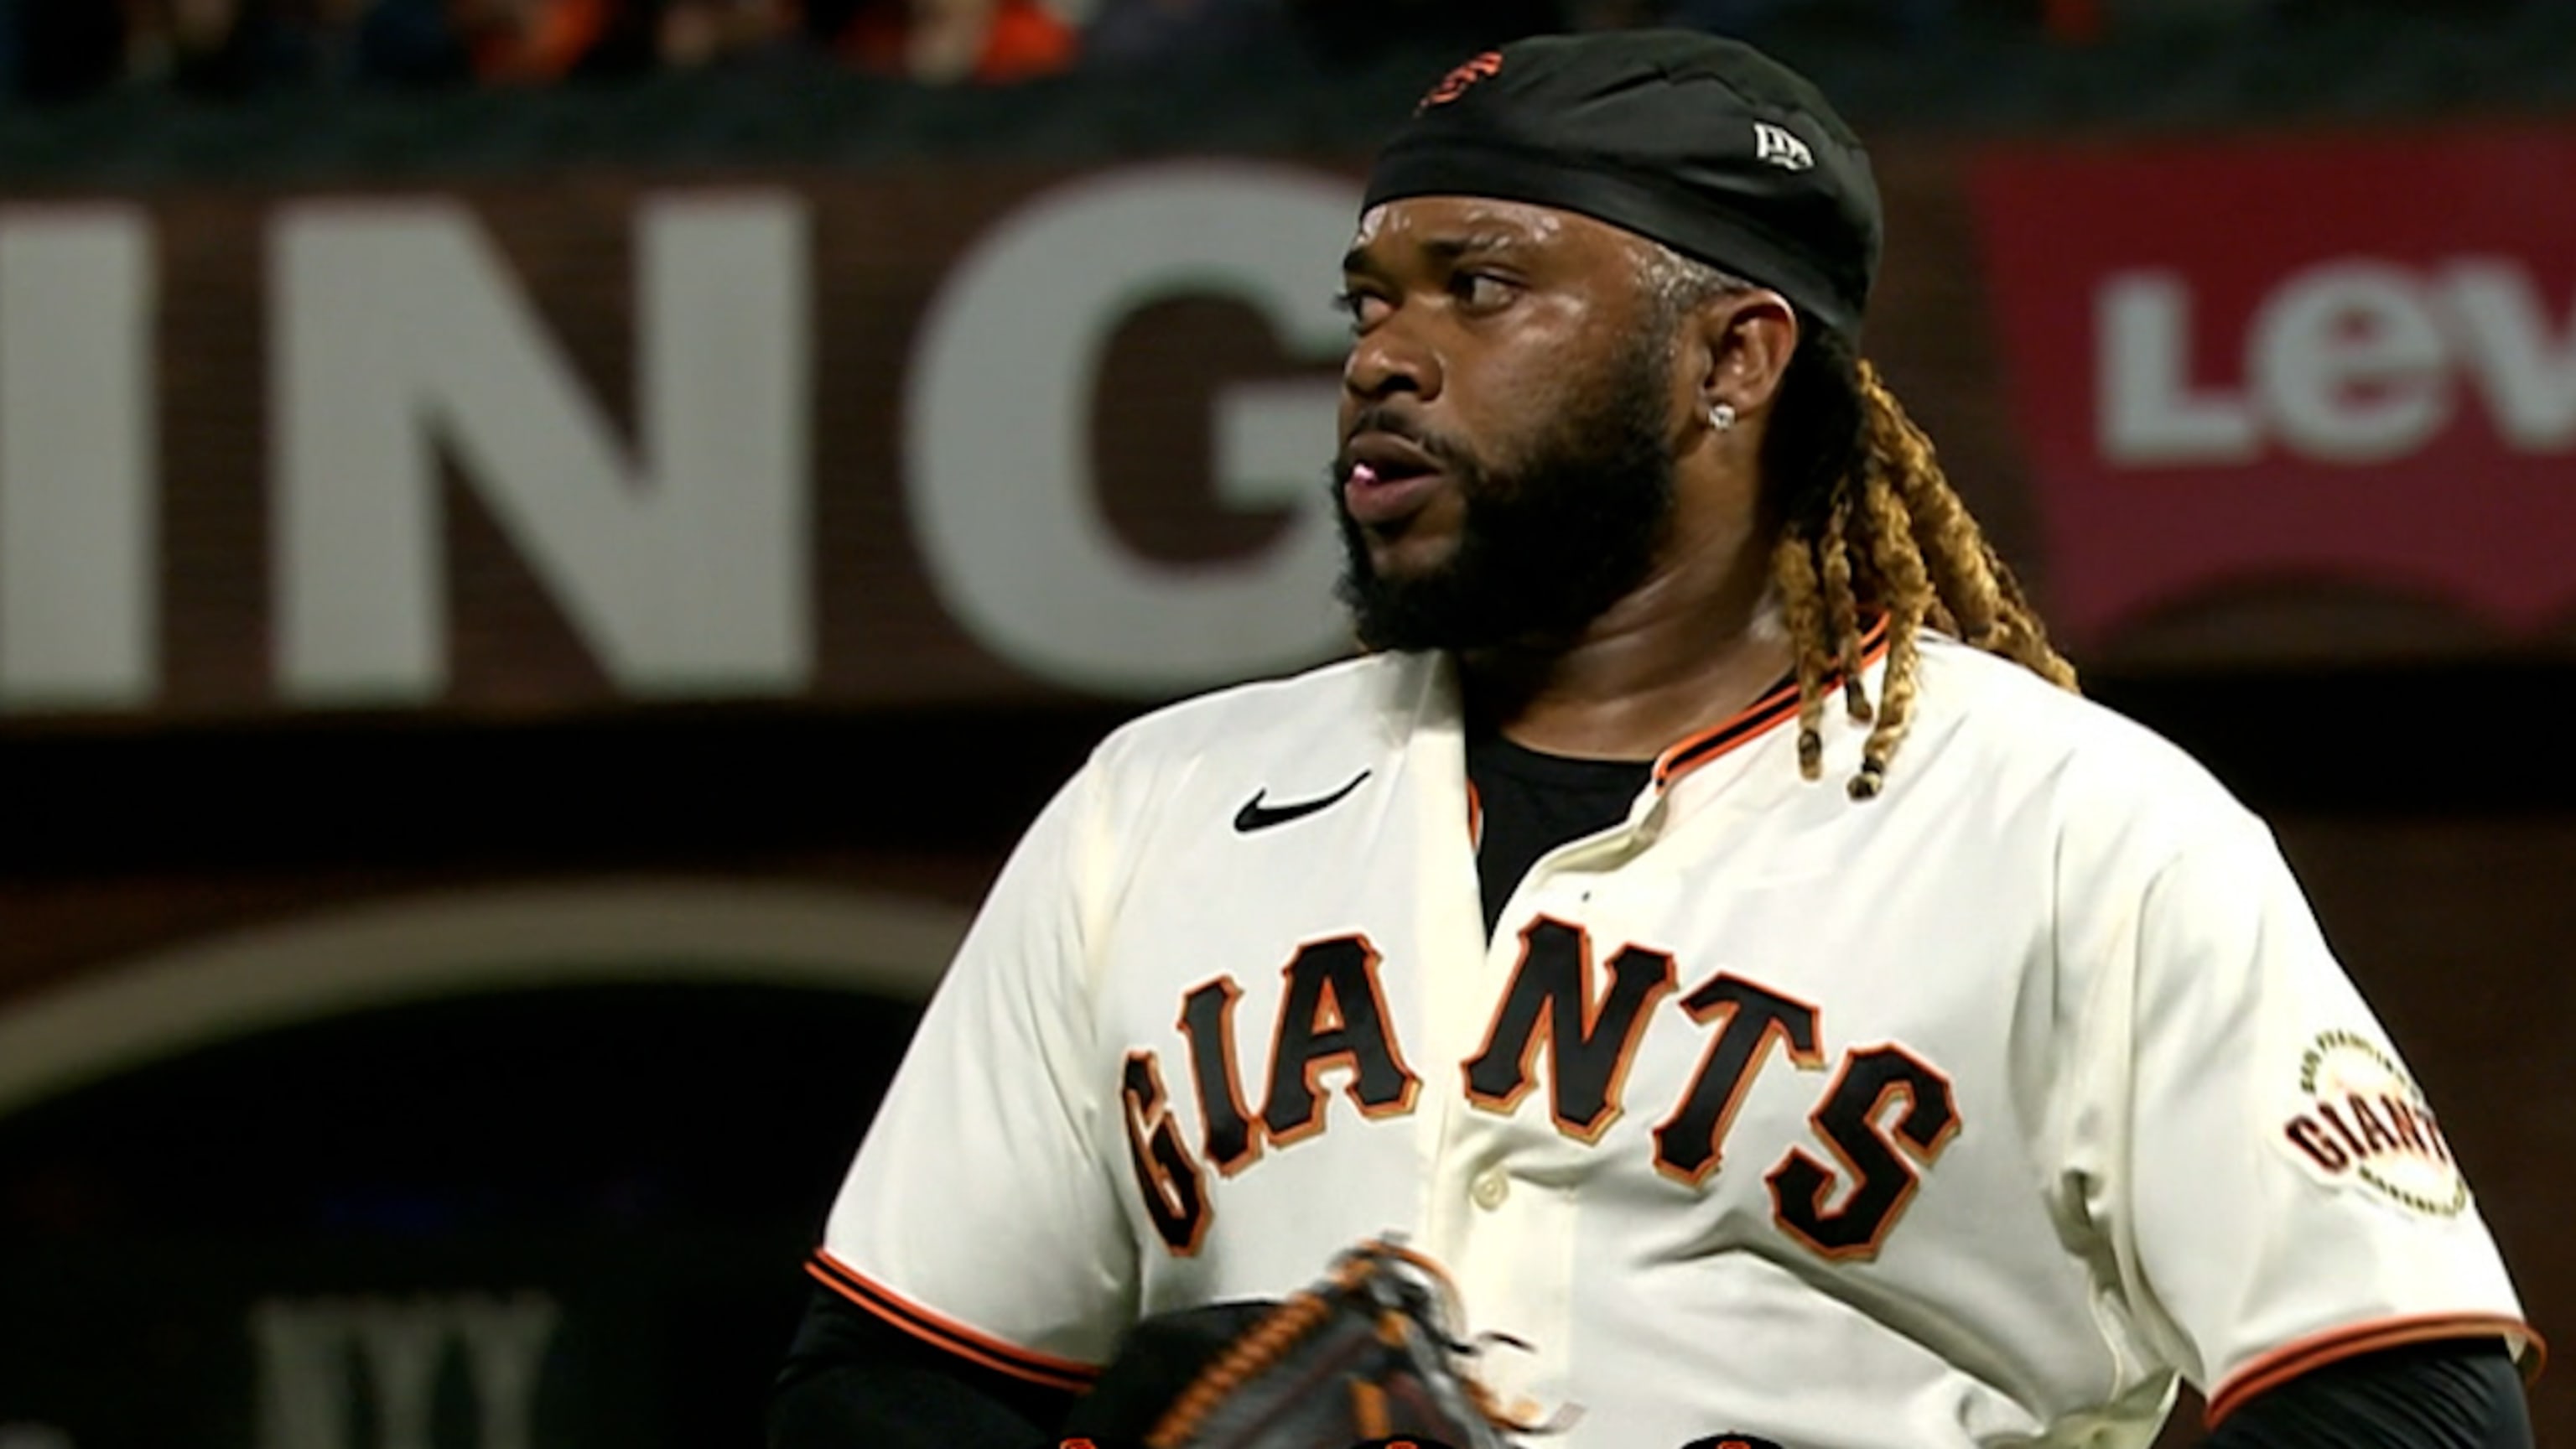 Johnny Cueto pitches 5-hitter, Giants beat Cardinals 6-2 - The